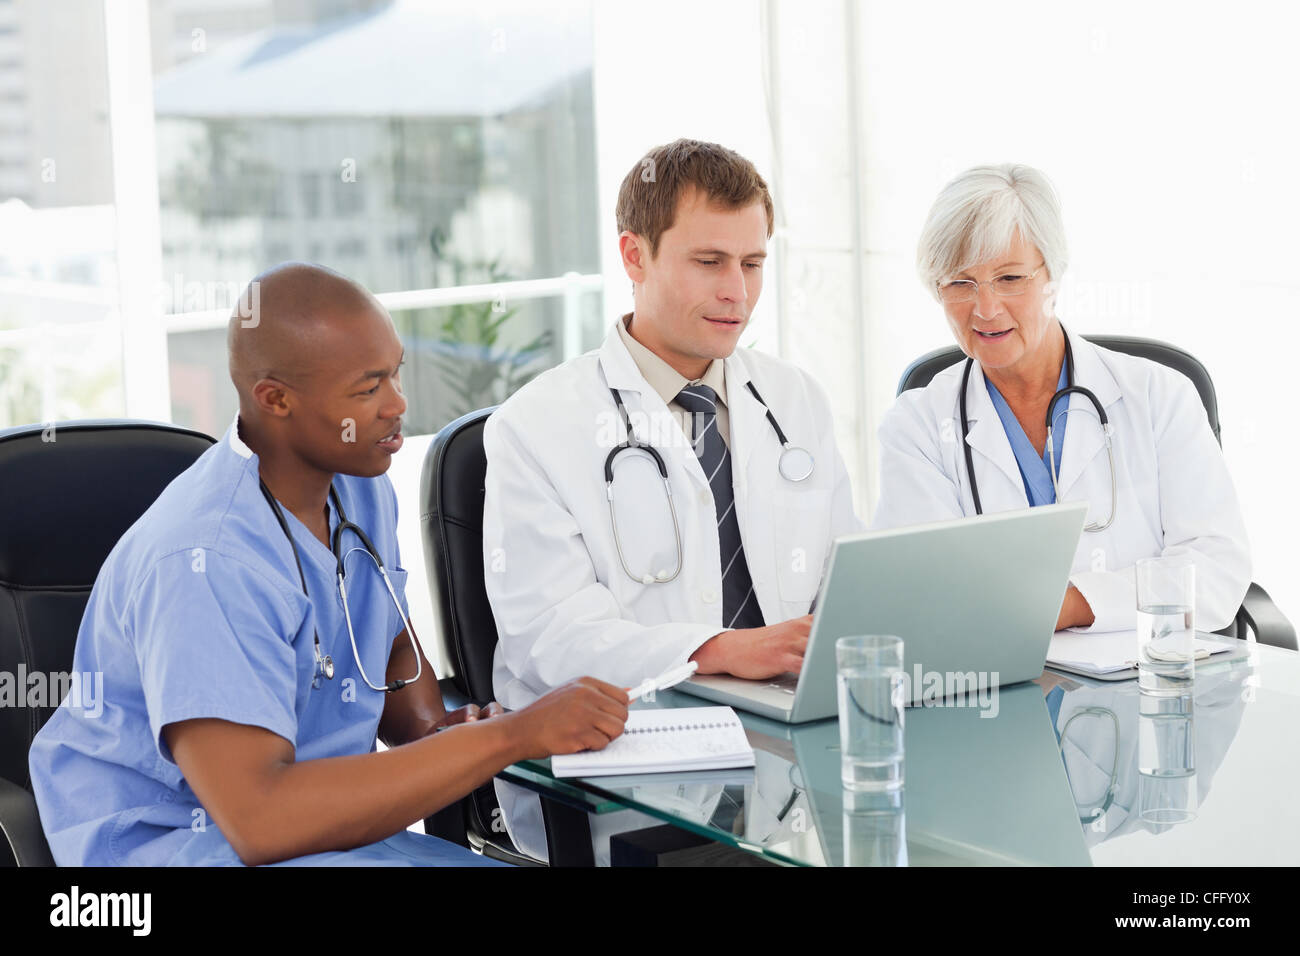 Doctors sitting in meeting room with a laptop Stock Photo